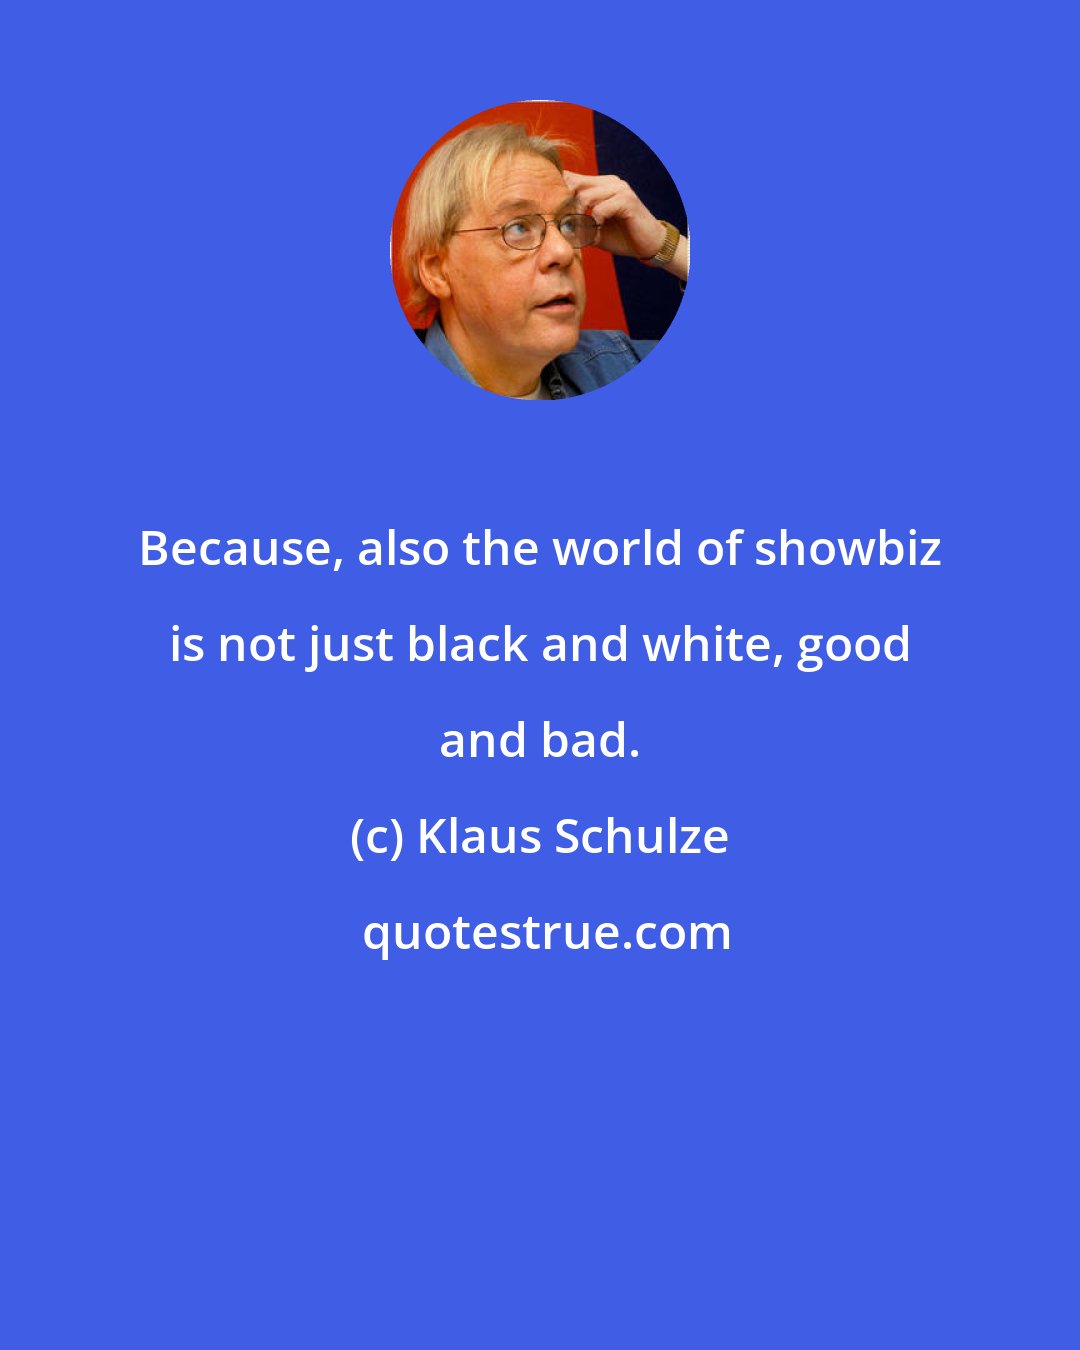 Klaus Schulze: Because, also the world of showbiz is not just black and white, good and bad.